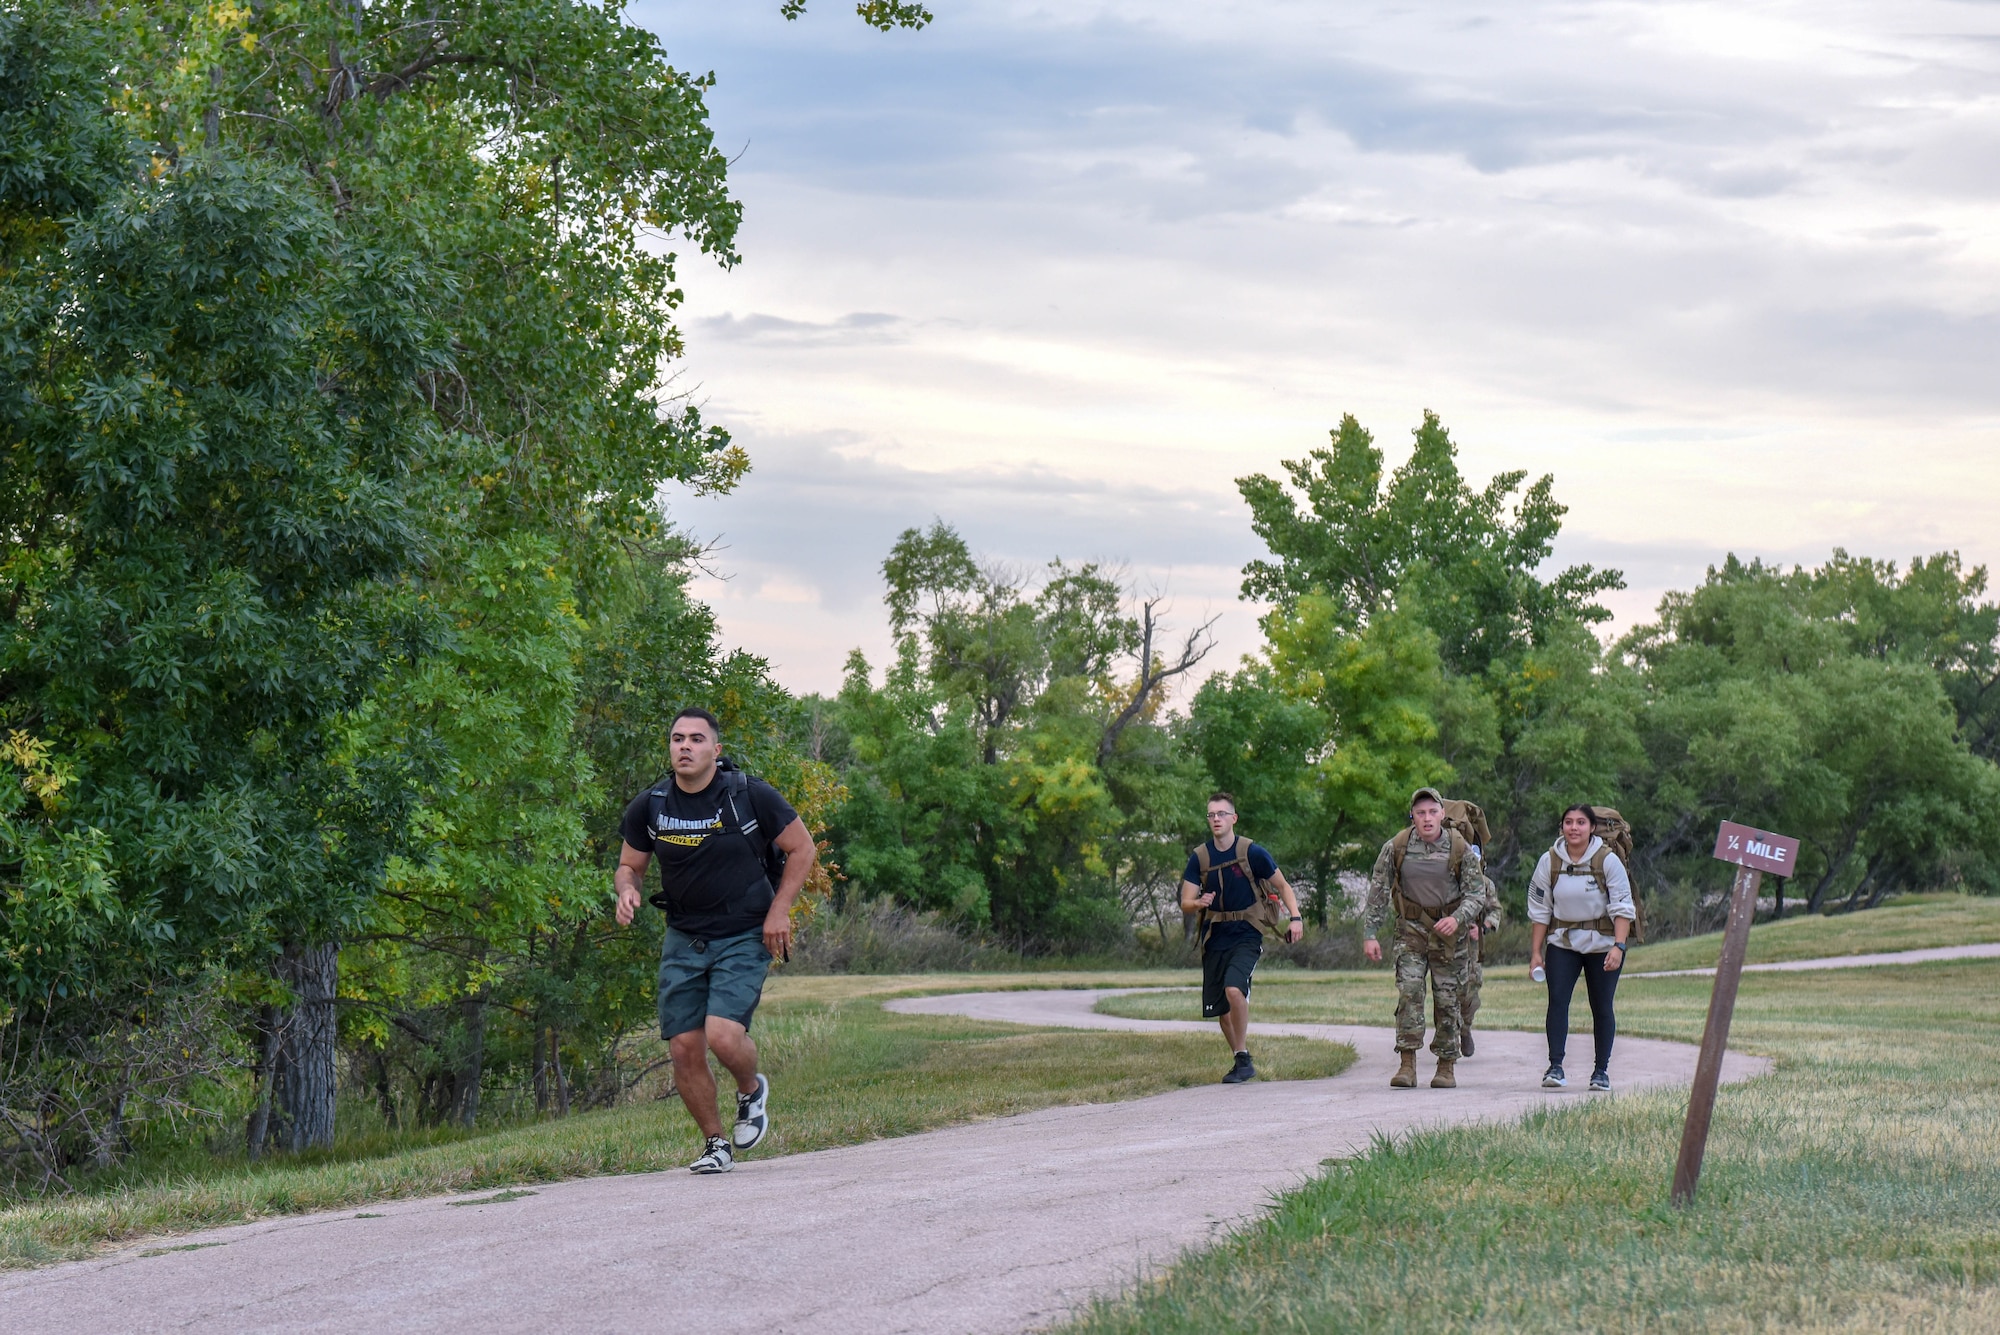 Service members participate in a 5K ruck march held in honor of Patriot Day at Ellsworth Air Force Base, S.D., Sept. 11, 2018. Approximately 35 men and women came together to ruck march on the 17th anniversary of the 9/11 terrorist attack that claimed the lives of nearly 3,000 people. (U.S. Air Force photo by Airman Christina Bennett)